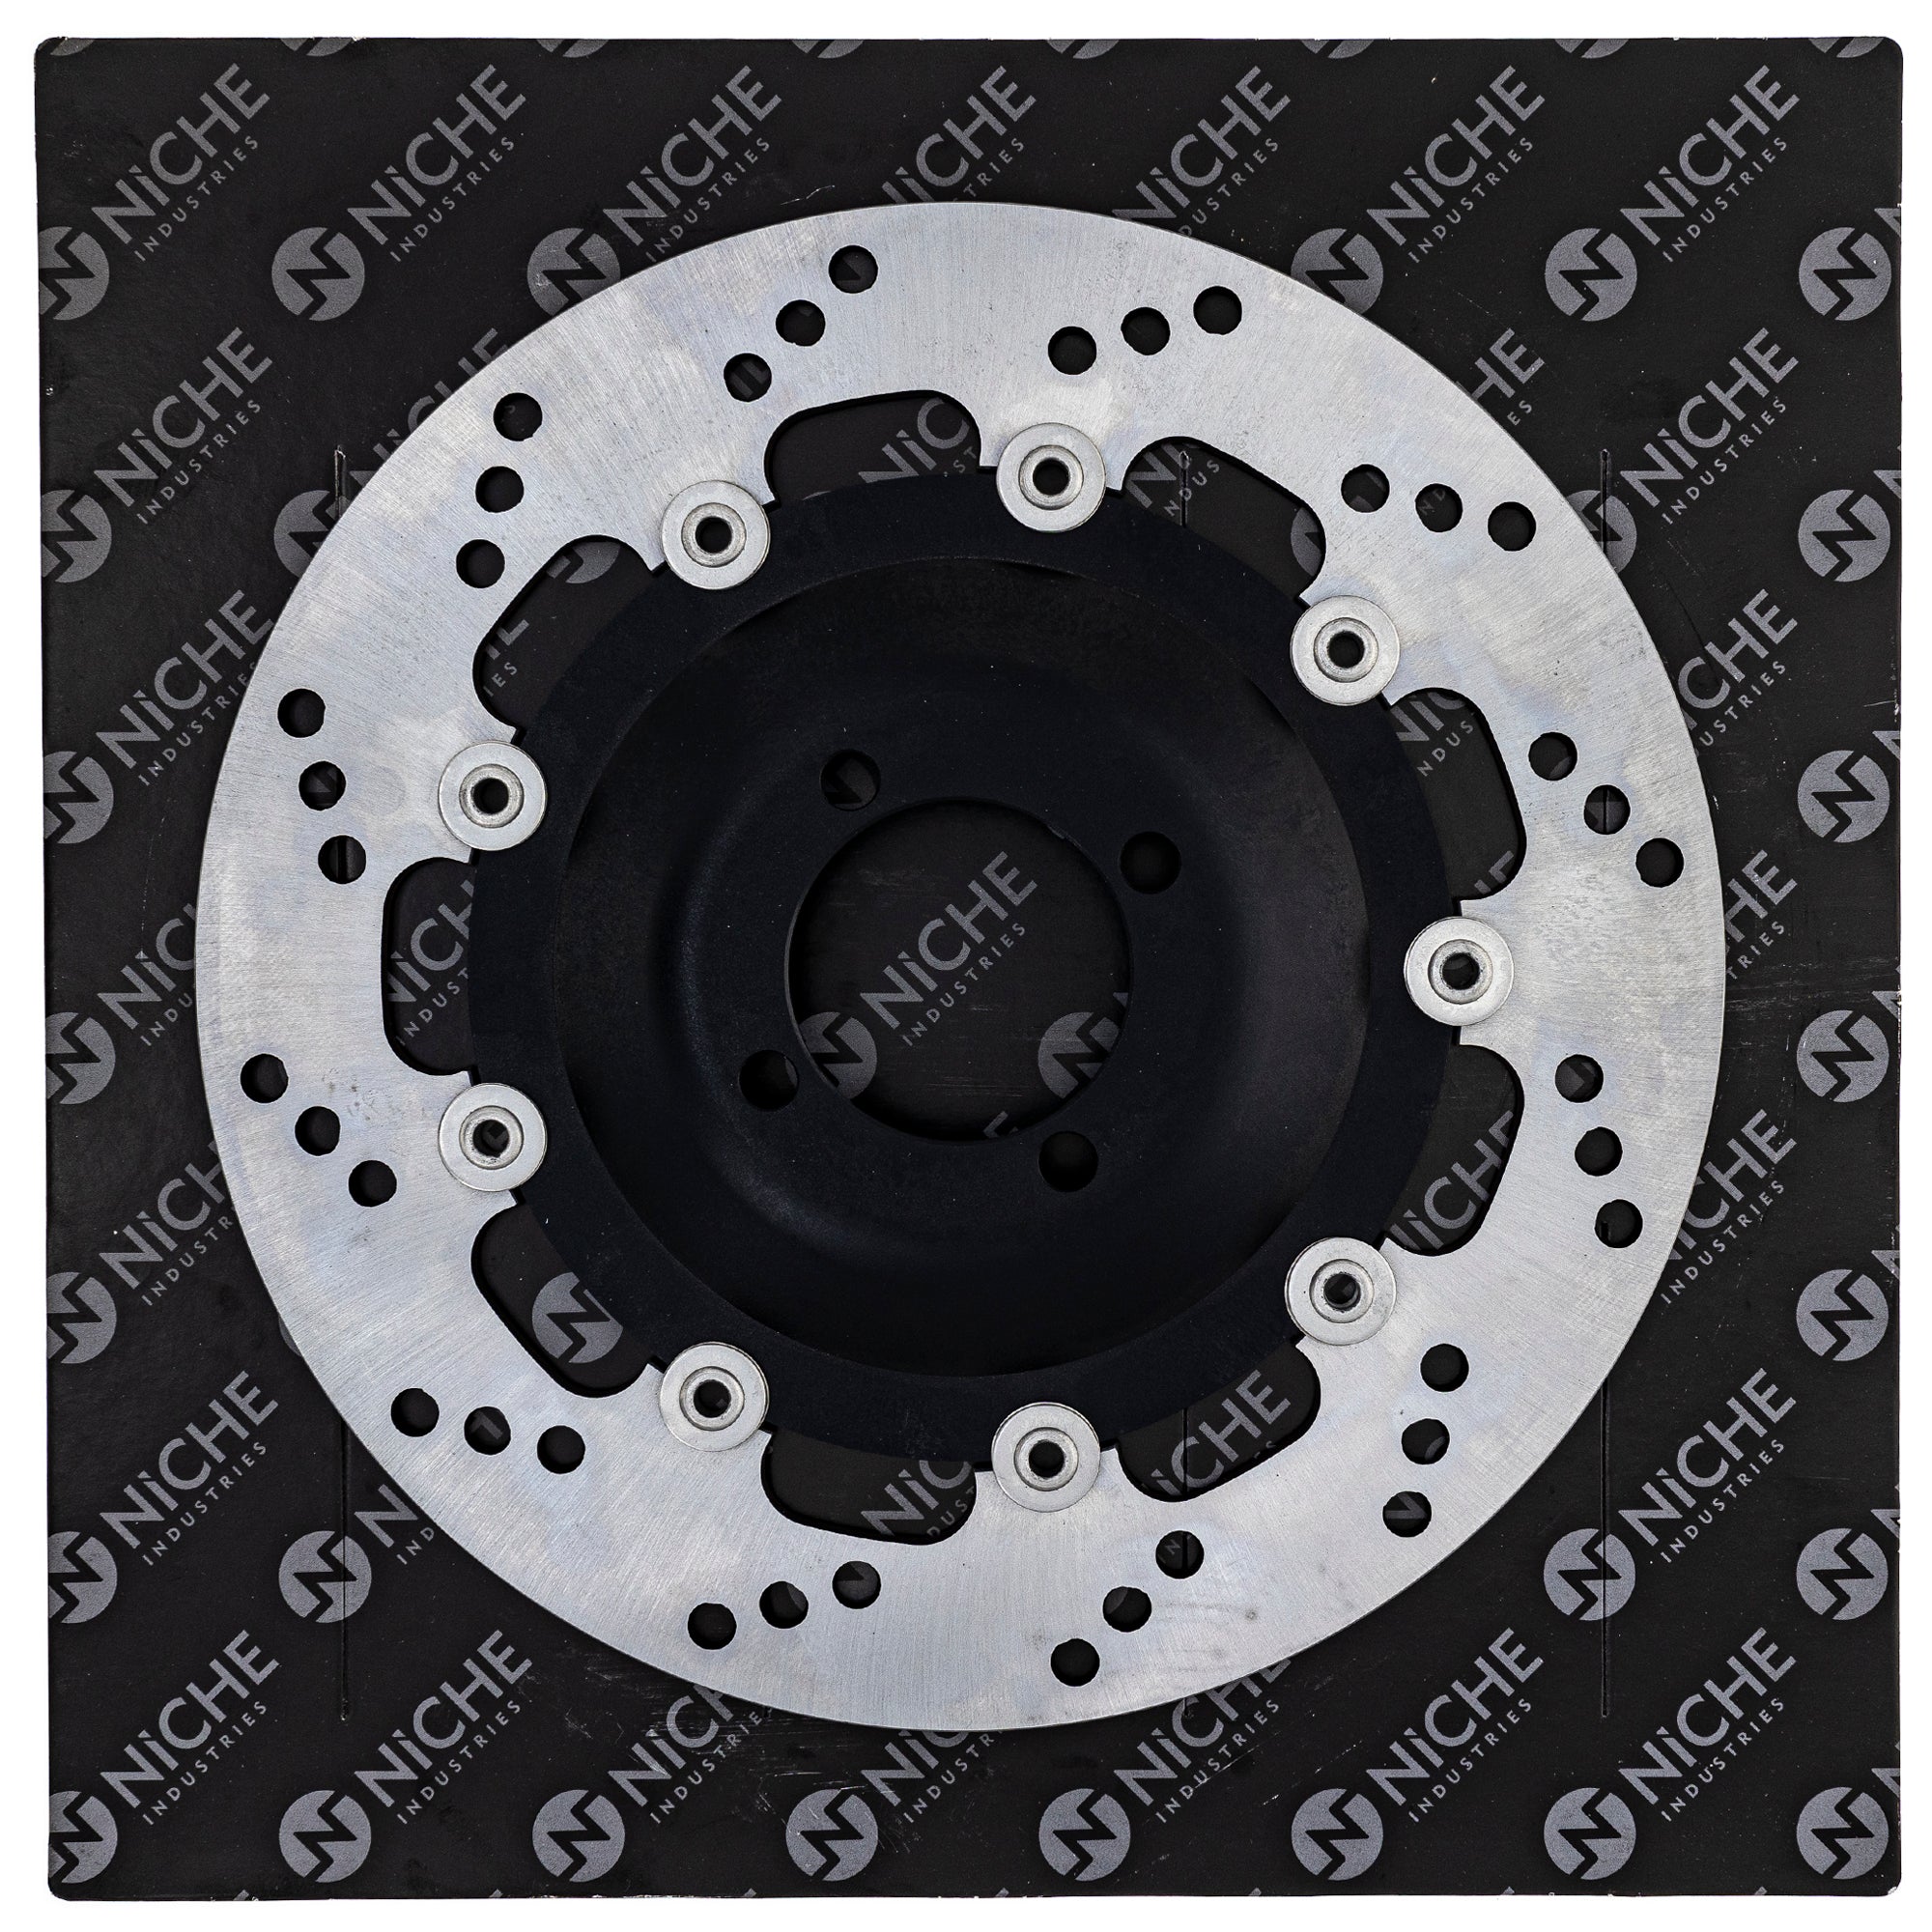 NICHE 519-CRT2371R Front Brake Rotor for zOTHER R80 R65 R100RT R100RS